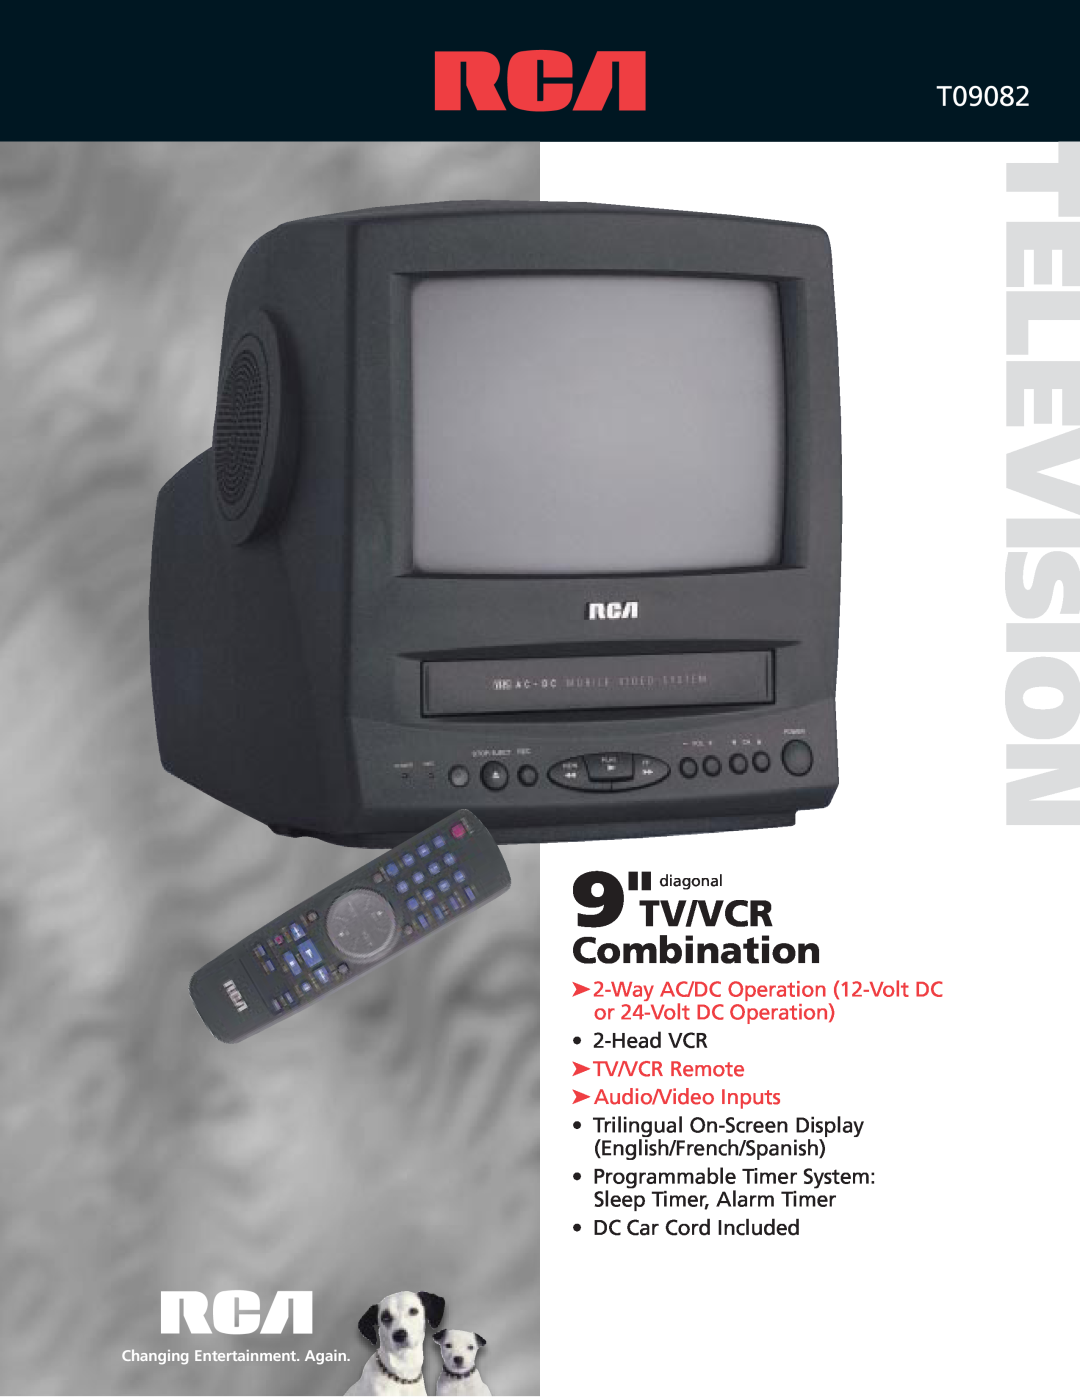 RCA T09082 manual Television, Combination, Way AC/DC Operation 12-Volt DC or 24-Volt DC Operation, Head VCR TV/VCR Remote 